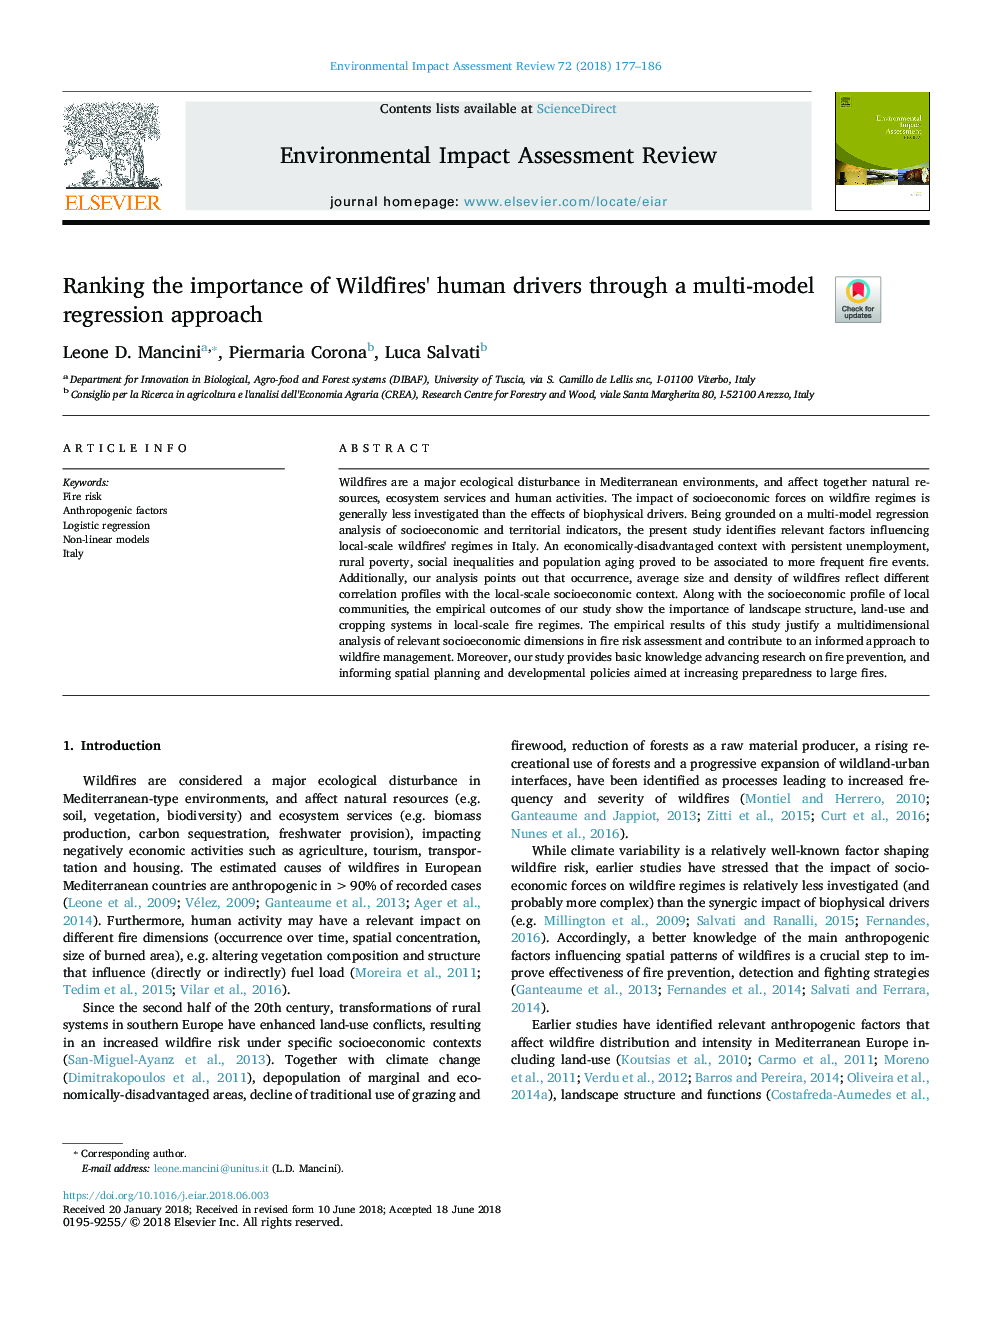 Ranking the importance of Wildfires' human drivers through a multi-model regression approach